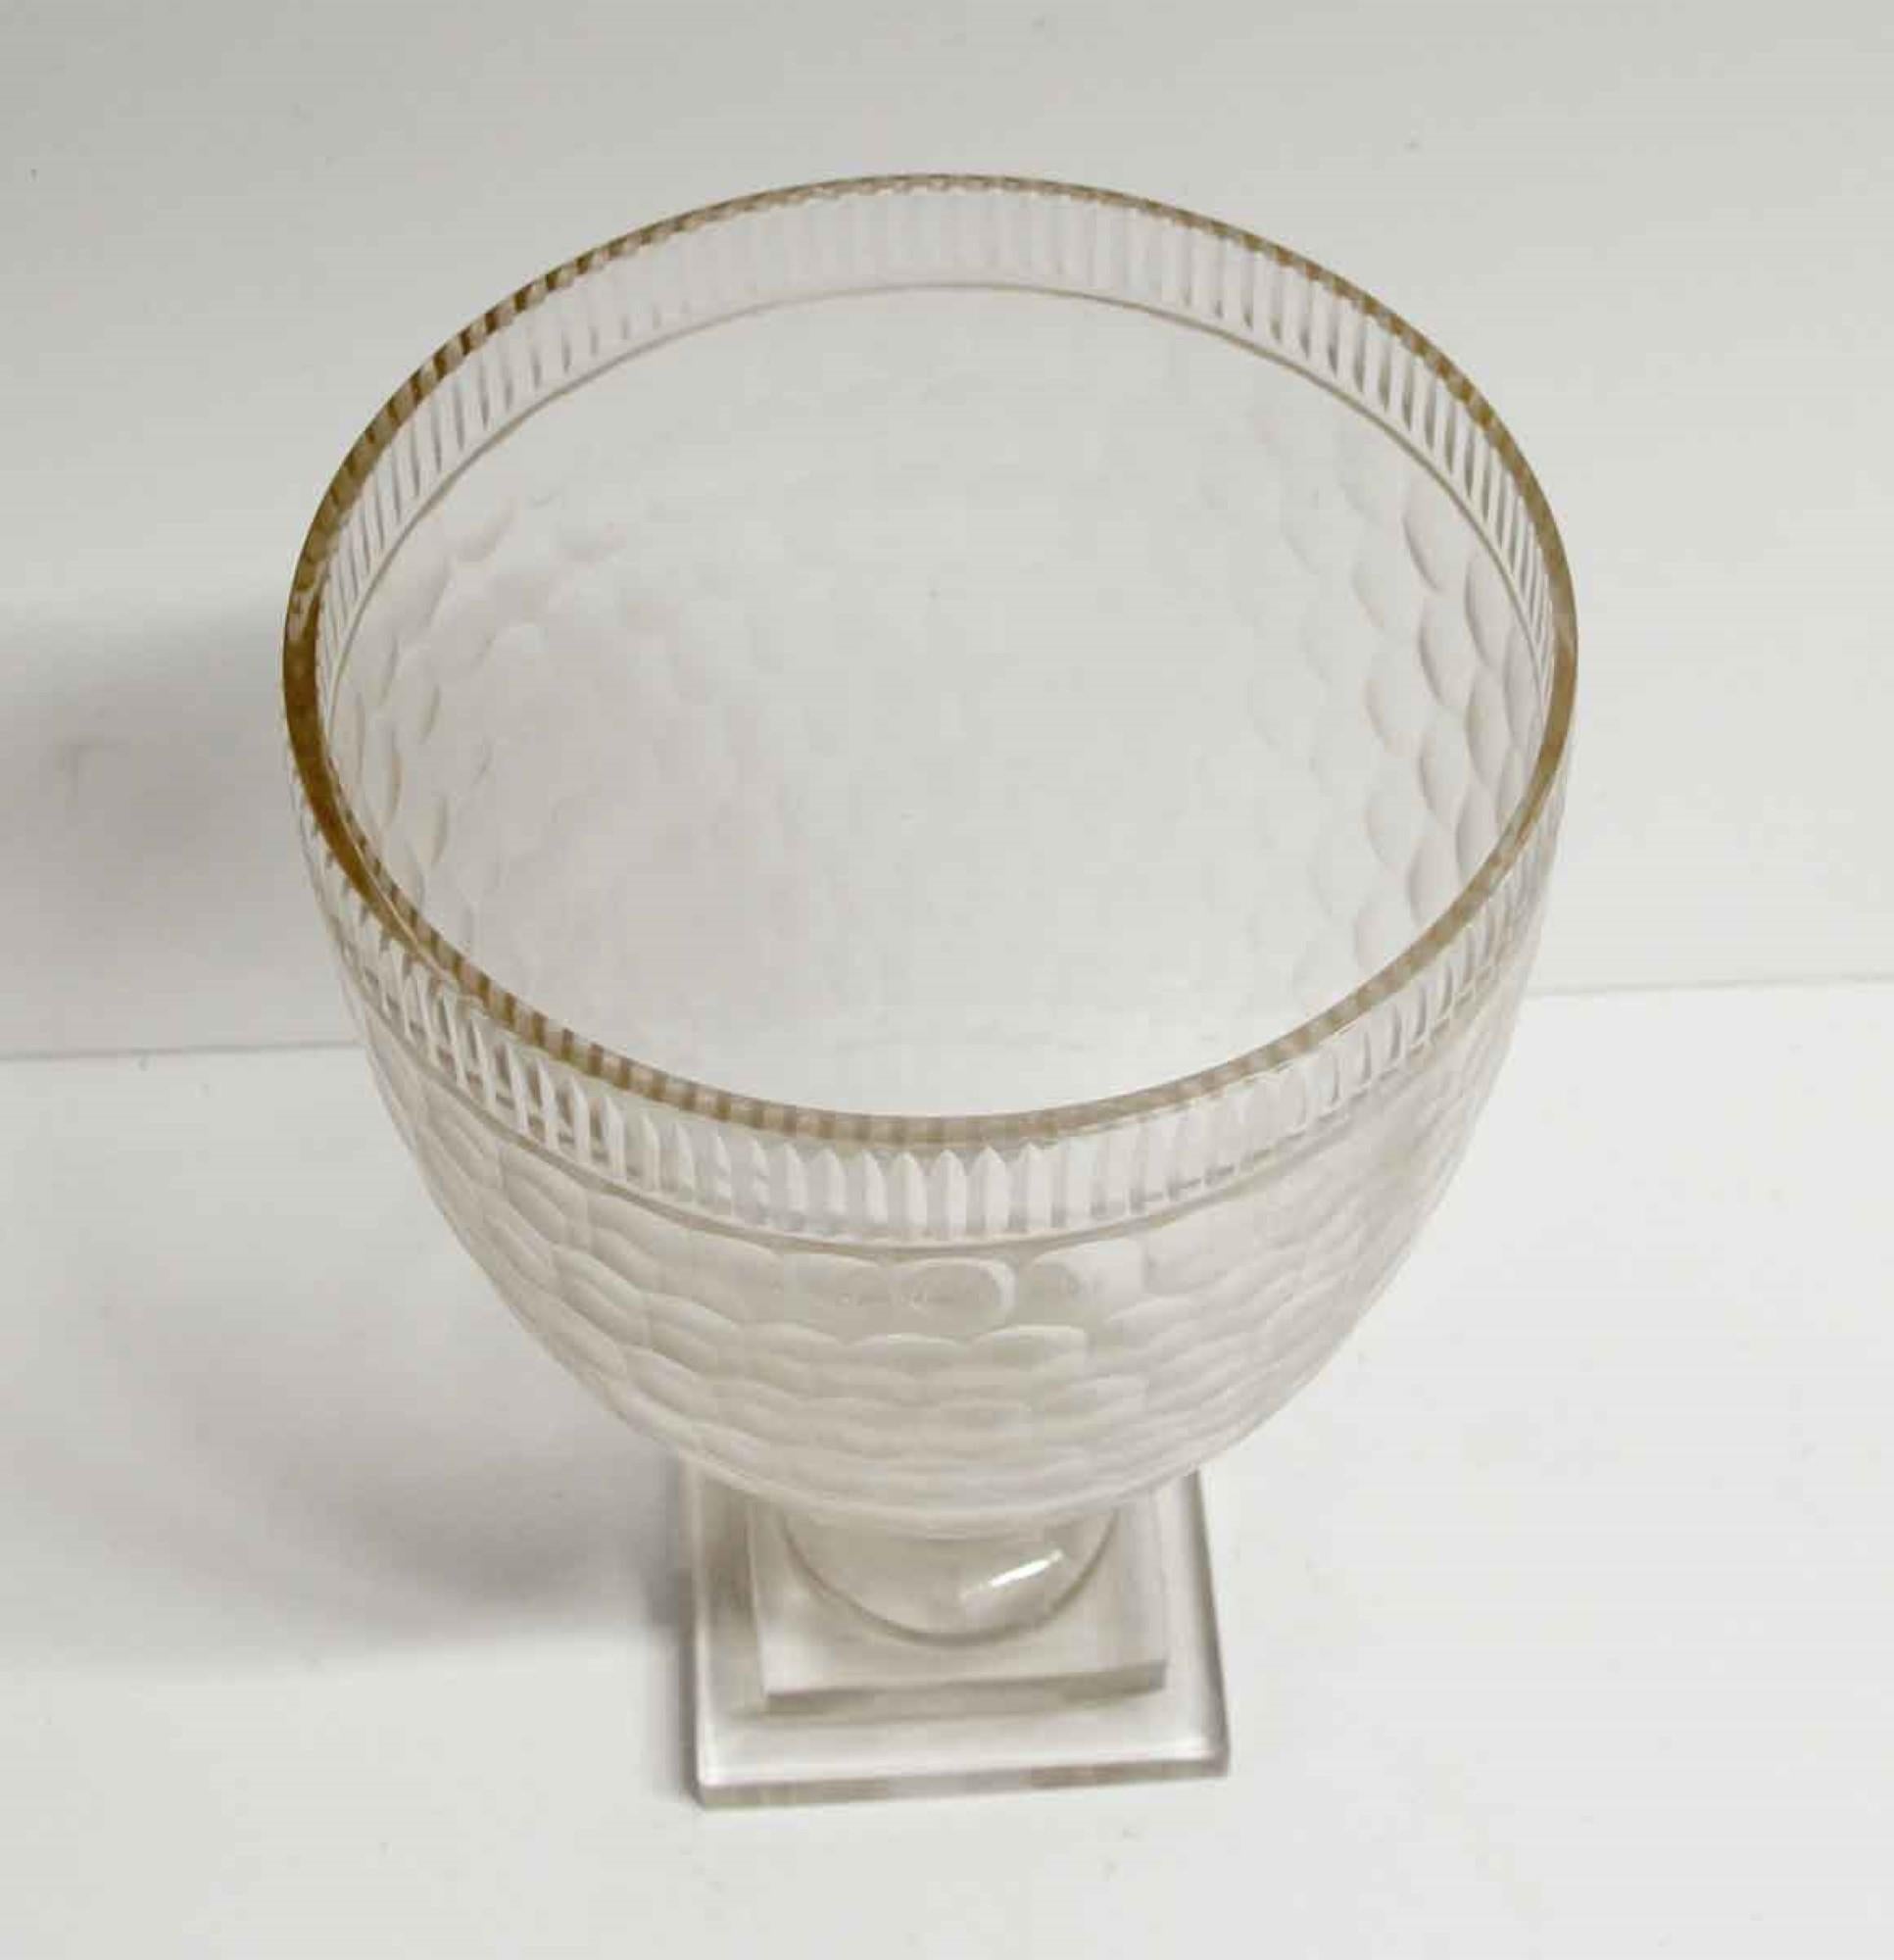 Honeycomb Pattern Clear Crystal Vase 2 Tier Base Quantity Available 3